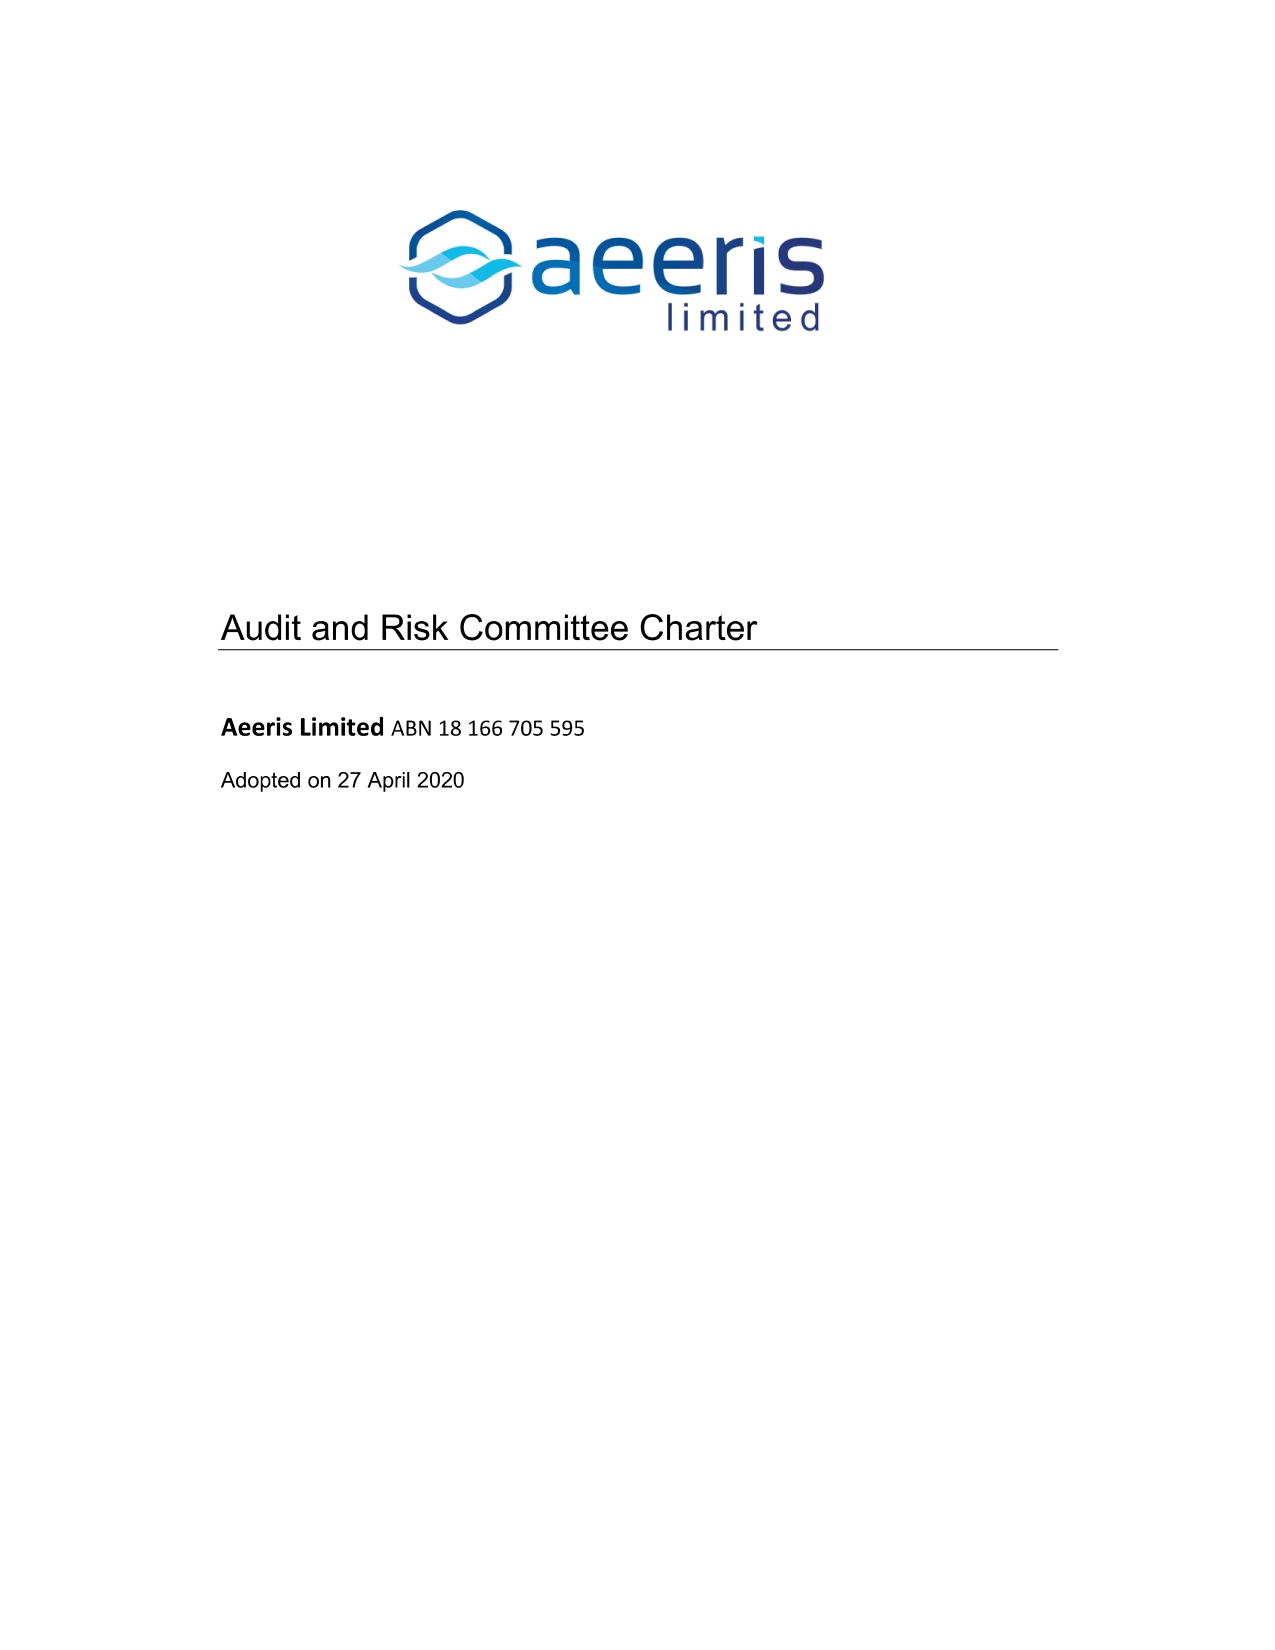 AER Audit and Risk Committee Charter